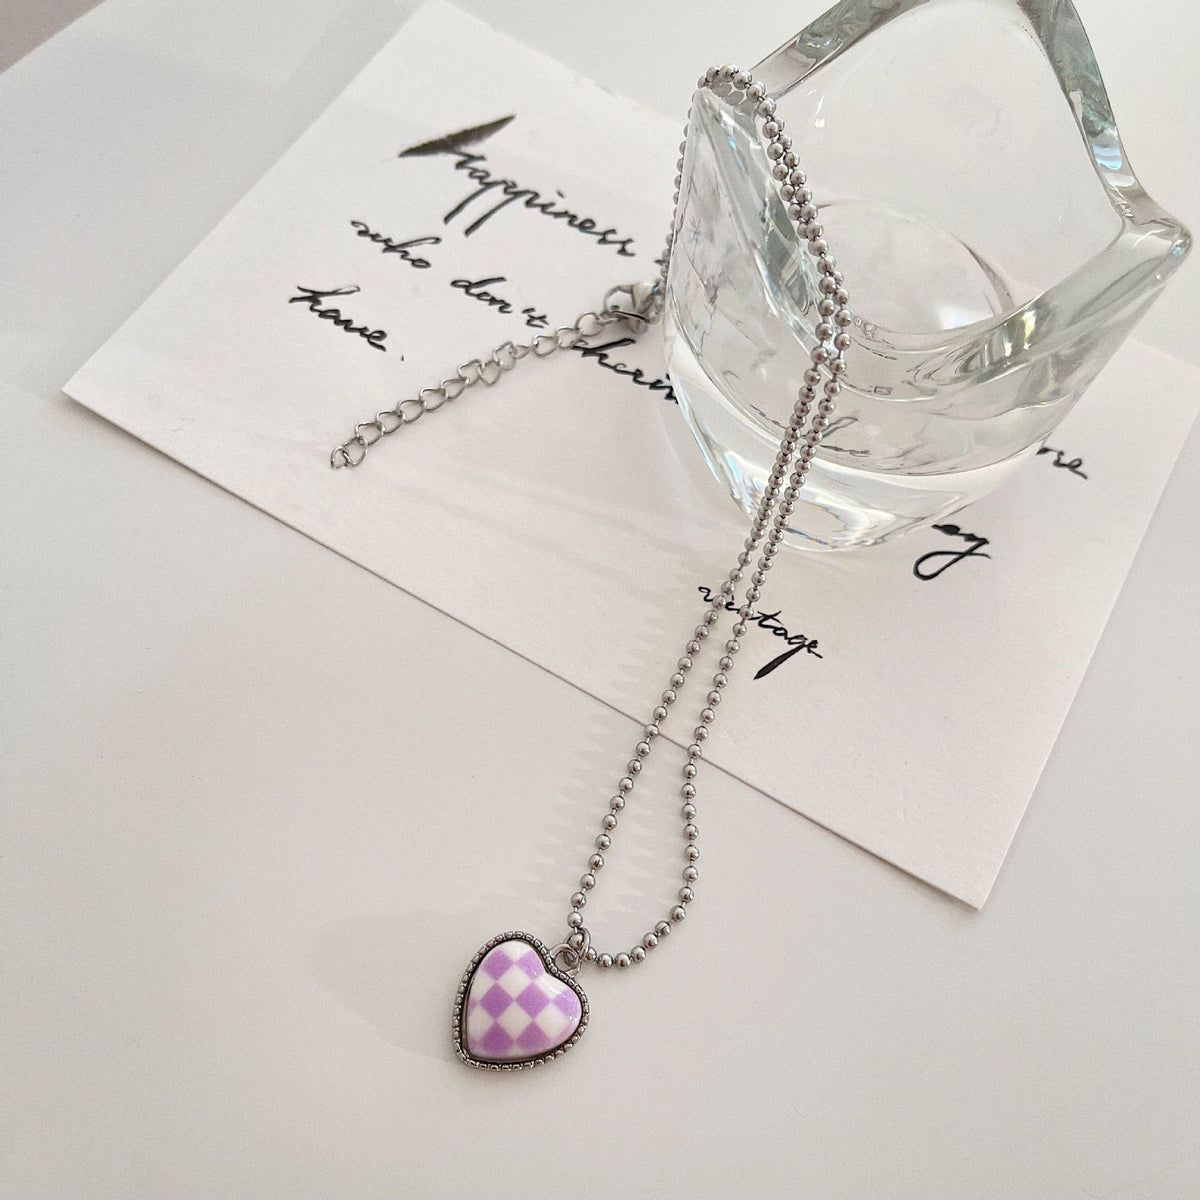 Y2K Jewelry Heart Candy Color Plaid Necklace For Women Metal Vintage Punk Hip Hop Necklace Charm 90S Aesthetic Gifts 2021 New